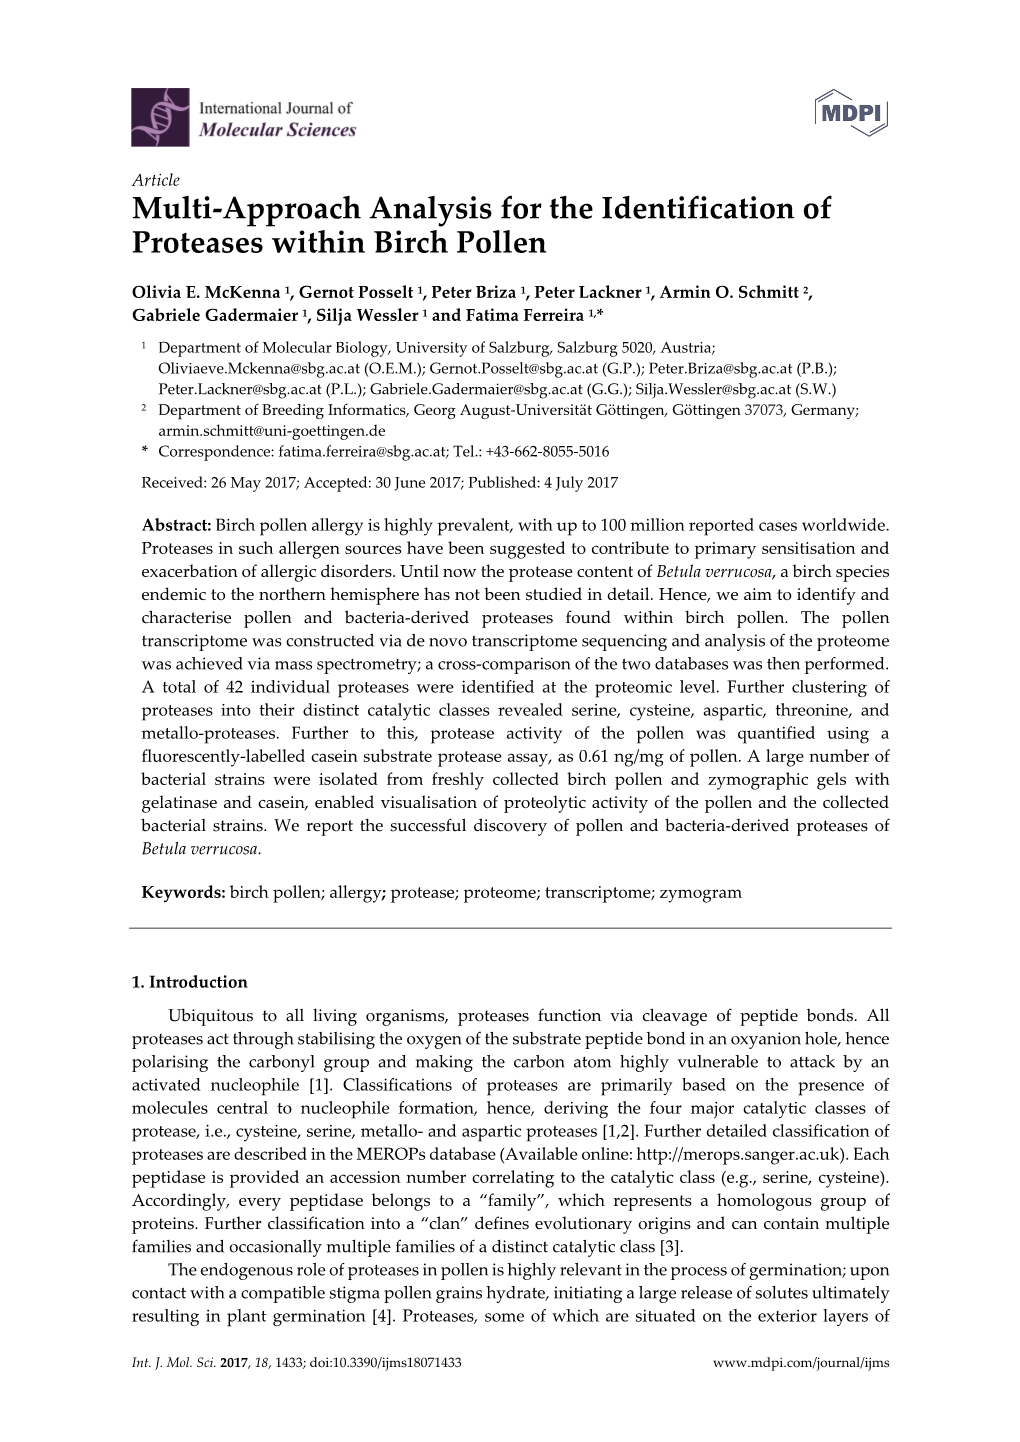 Multi-Approach Analysis for the Identification of Proteases Within Birch Pollen